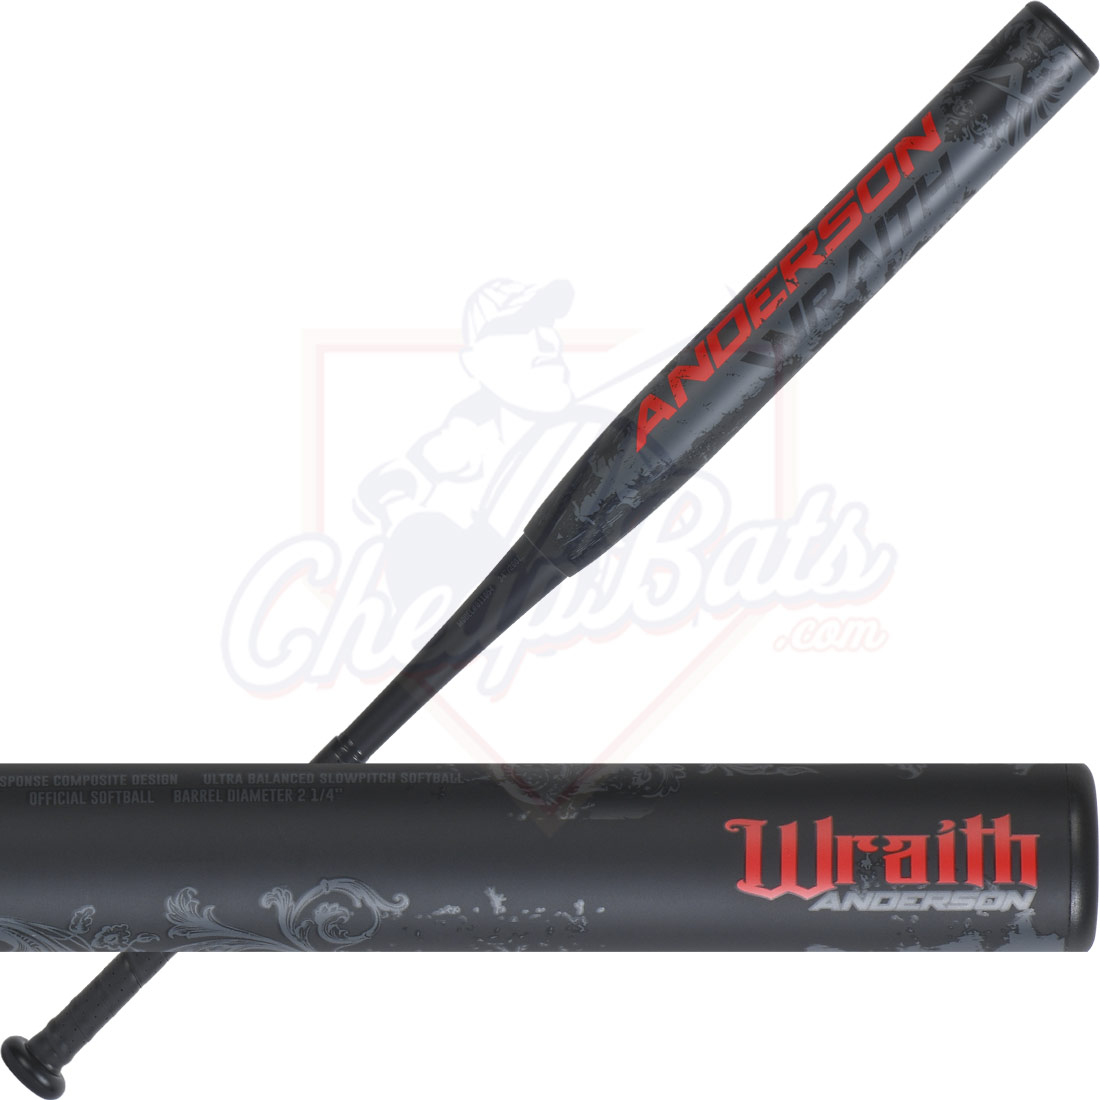 2021 Anderson Wraith Slowpitch Softball Bat End Loaded USSSA 011054